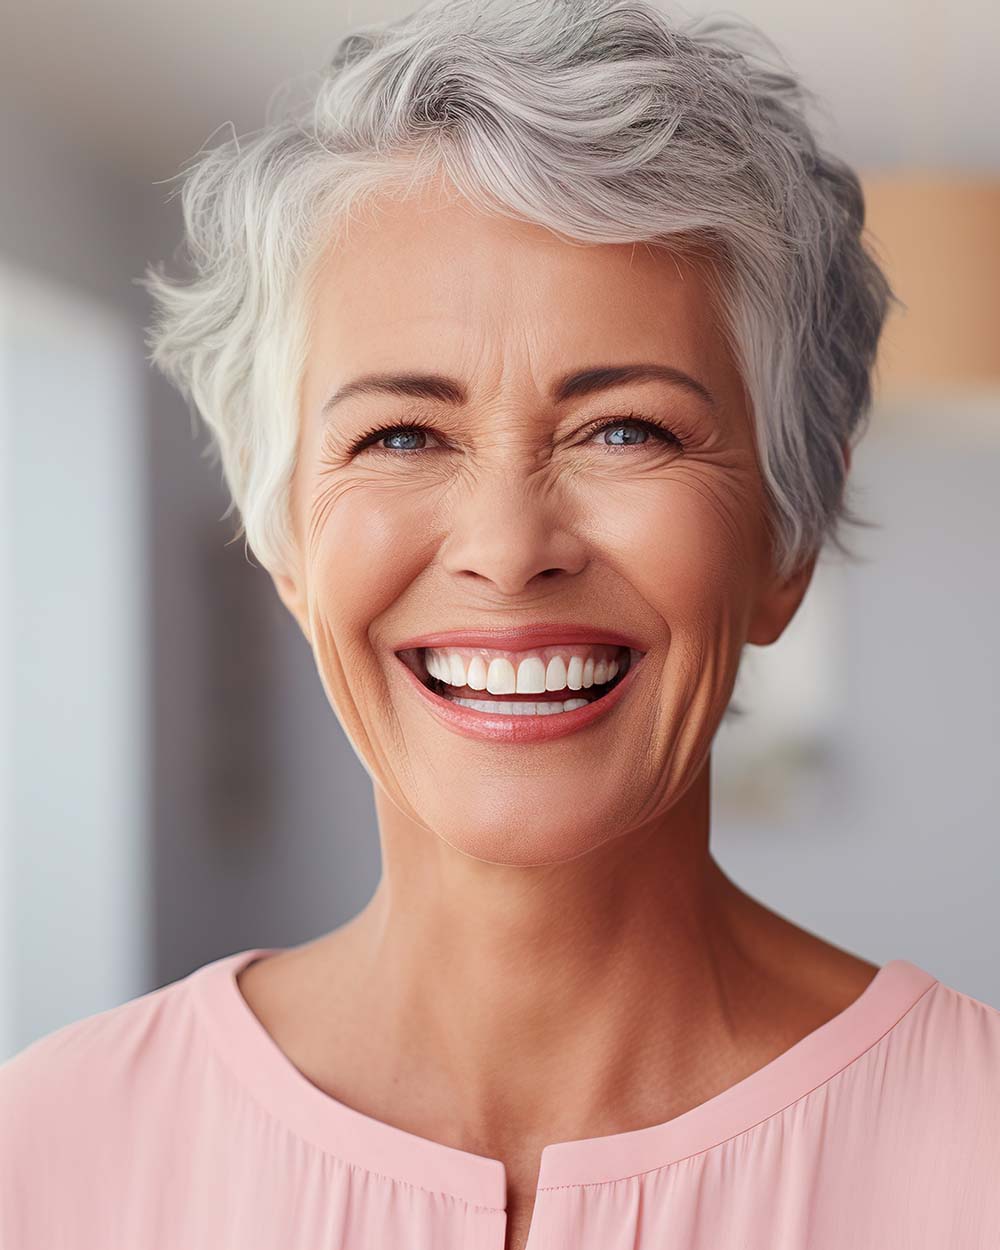 A woman smiles after receiving All-on-4 dental implants in LaGrange, Georgia from LaGrange Oral Surgery and Implant Center.